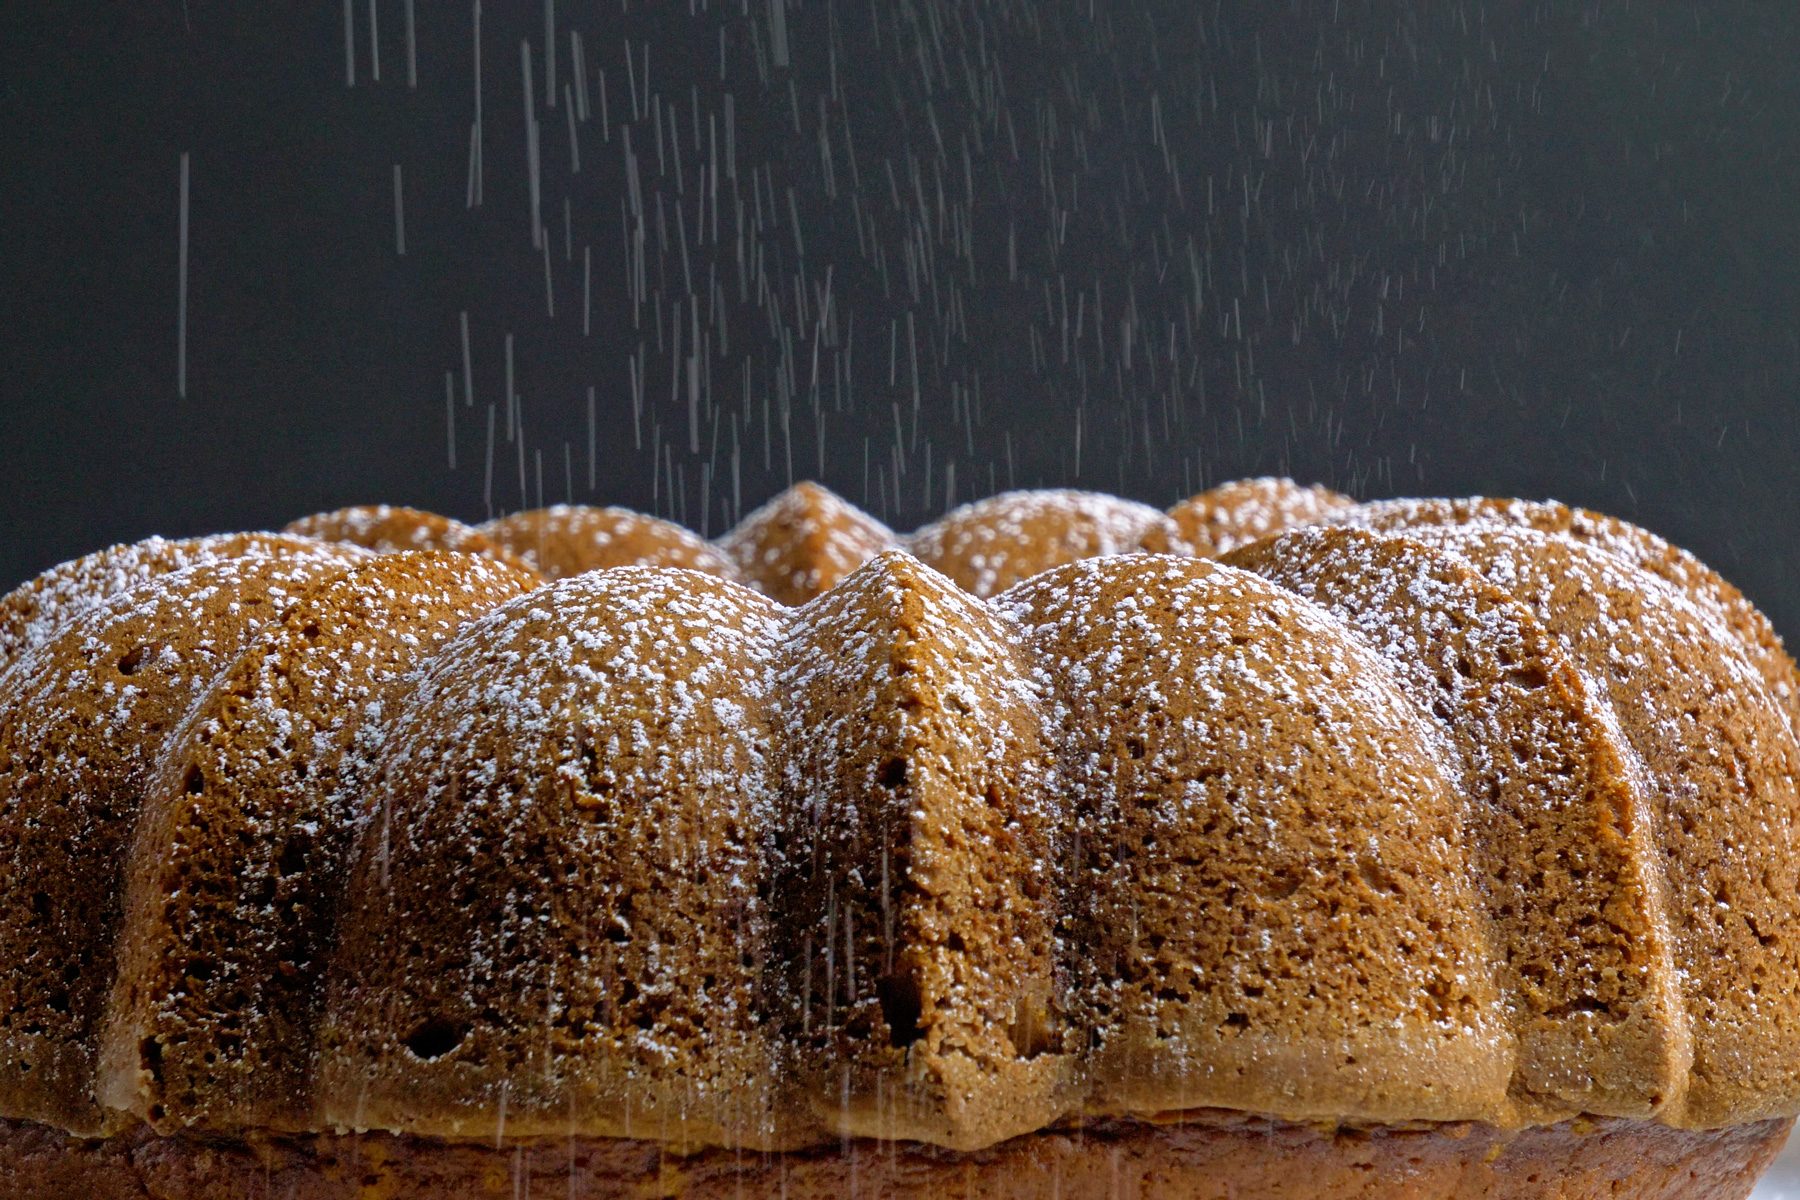 A pumpkin bundt cake with confectioners sugar dust topping